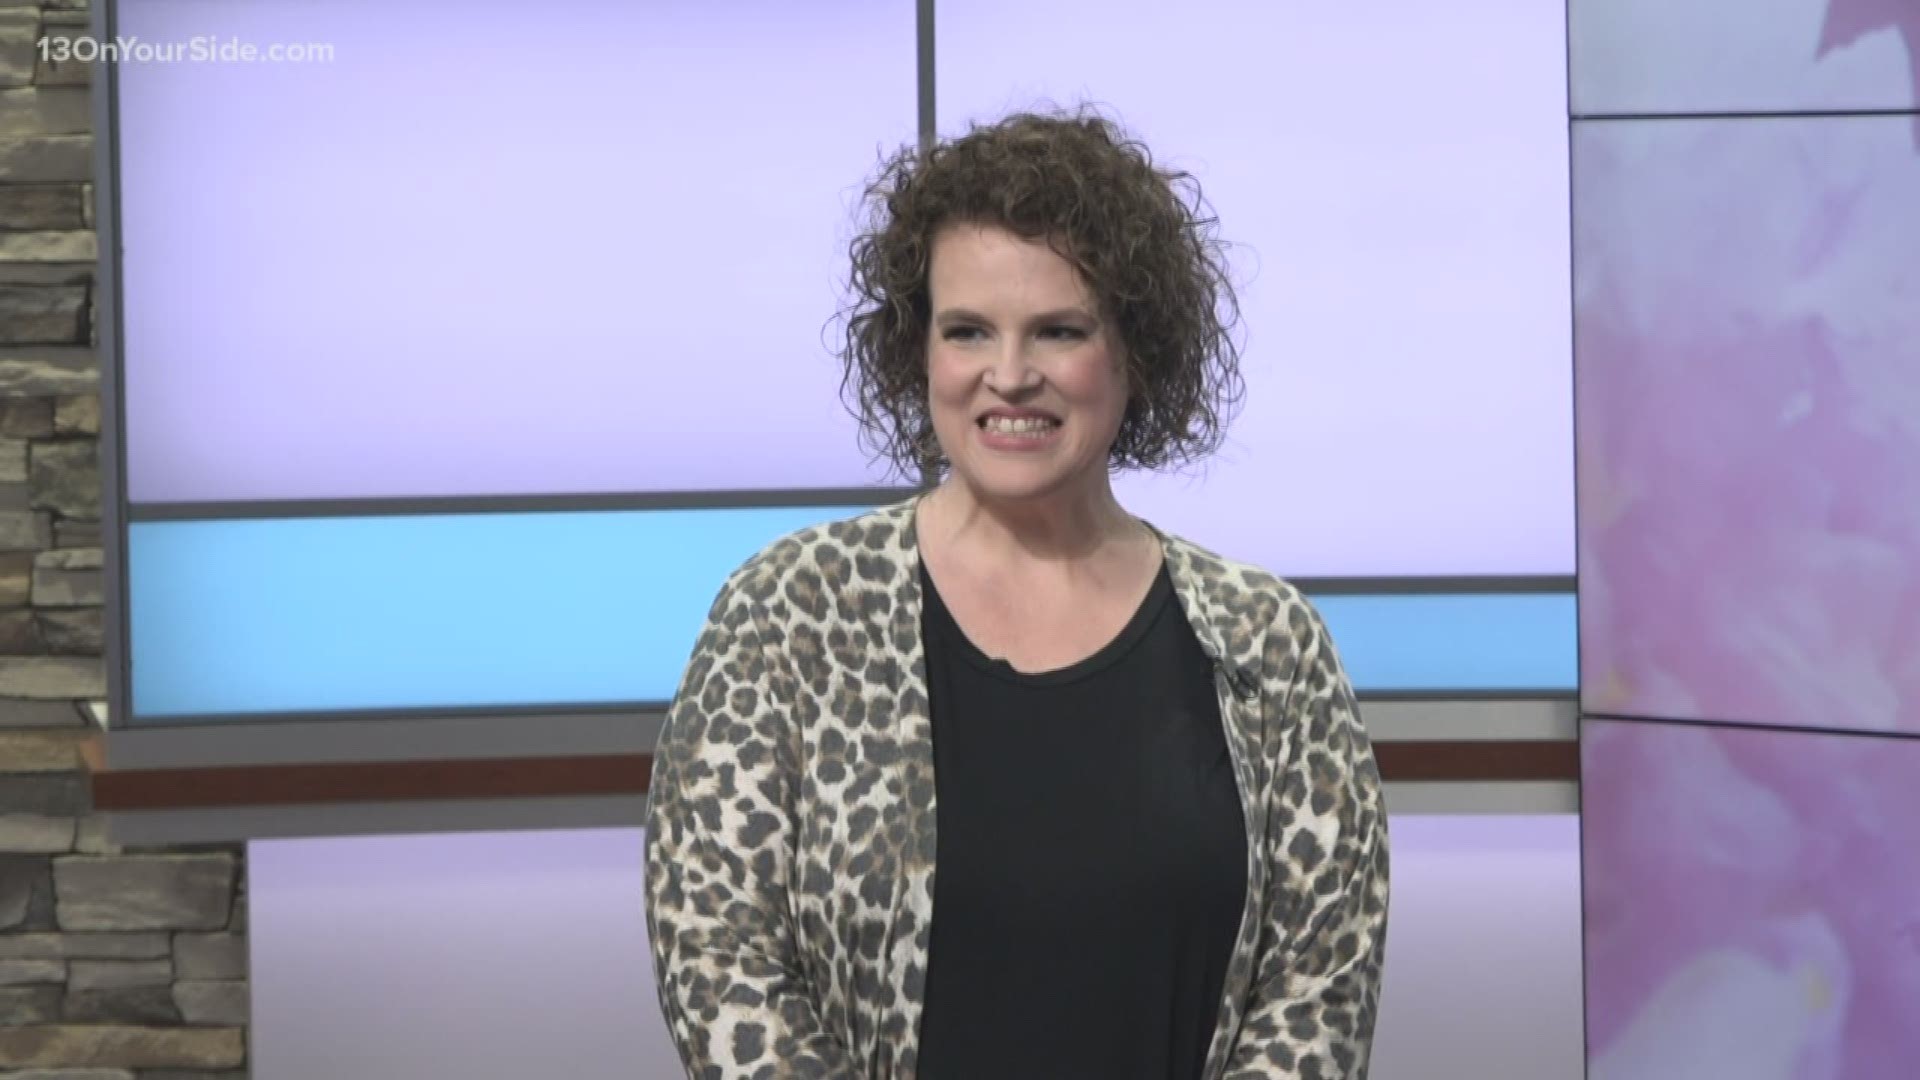 It's time to get a fresh new look for spring. The Makeover Monday team from Matt Flora Hair Studio got to work on giving Kendra DeYoung a new look for spring.